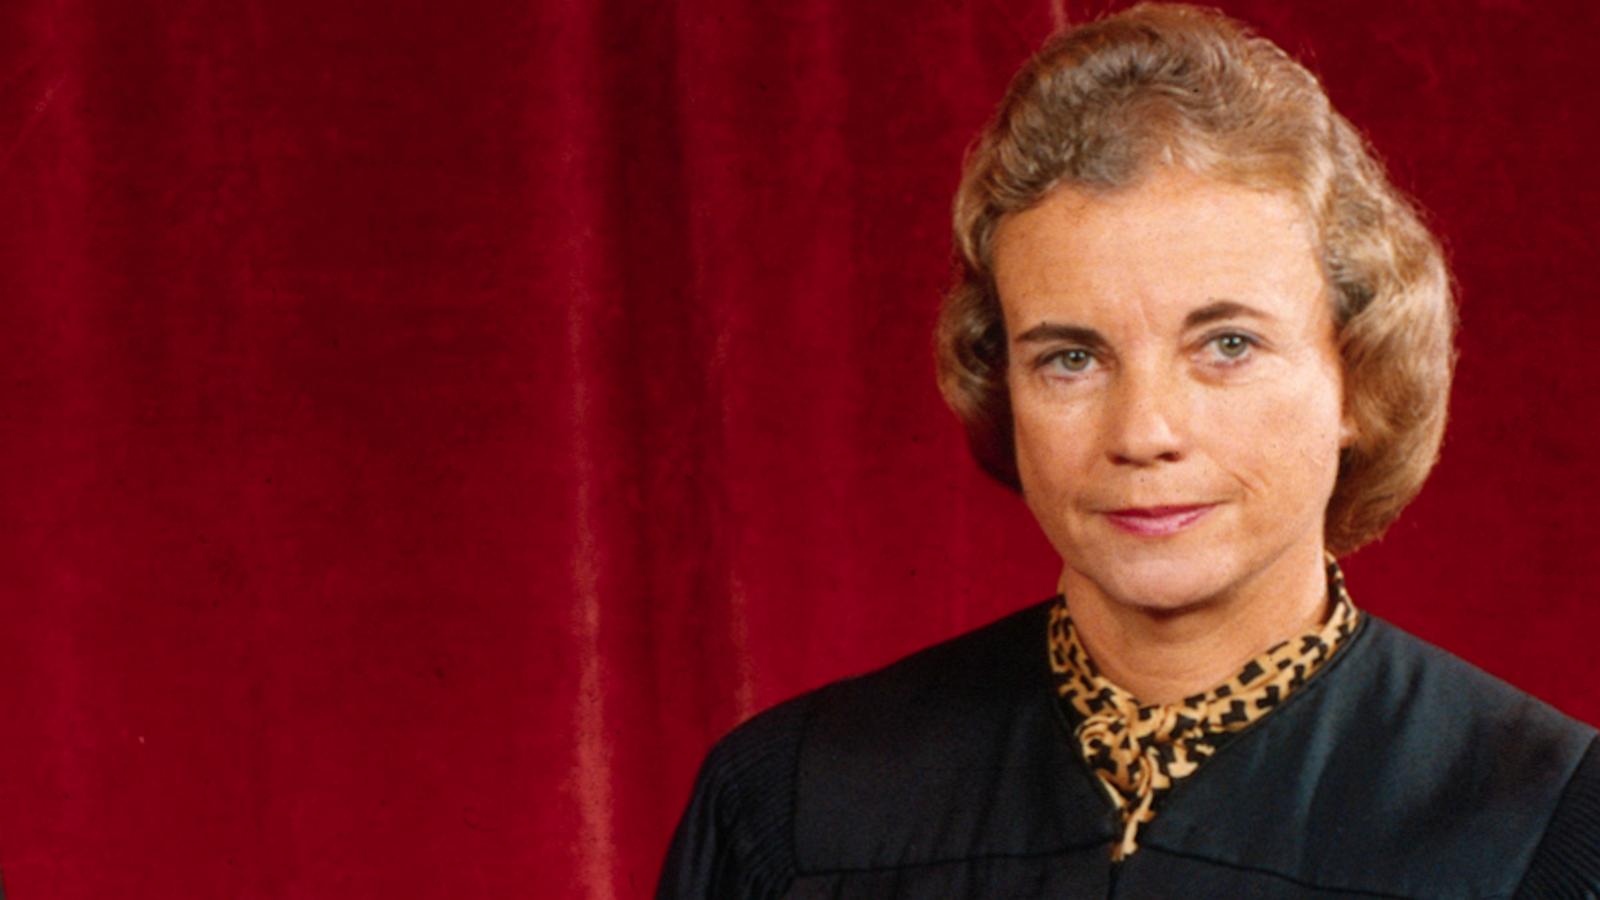 VIDEO: Sandra Day O'Connor, 1st woman on Supreme Court, dies at 93